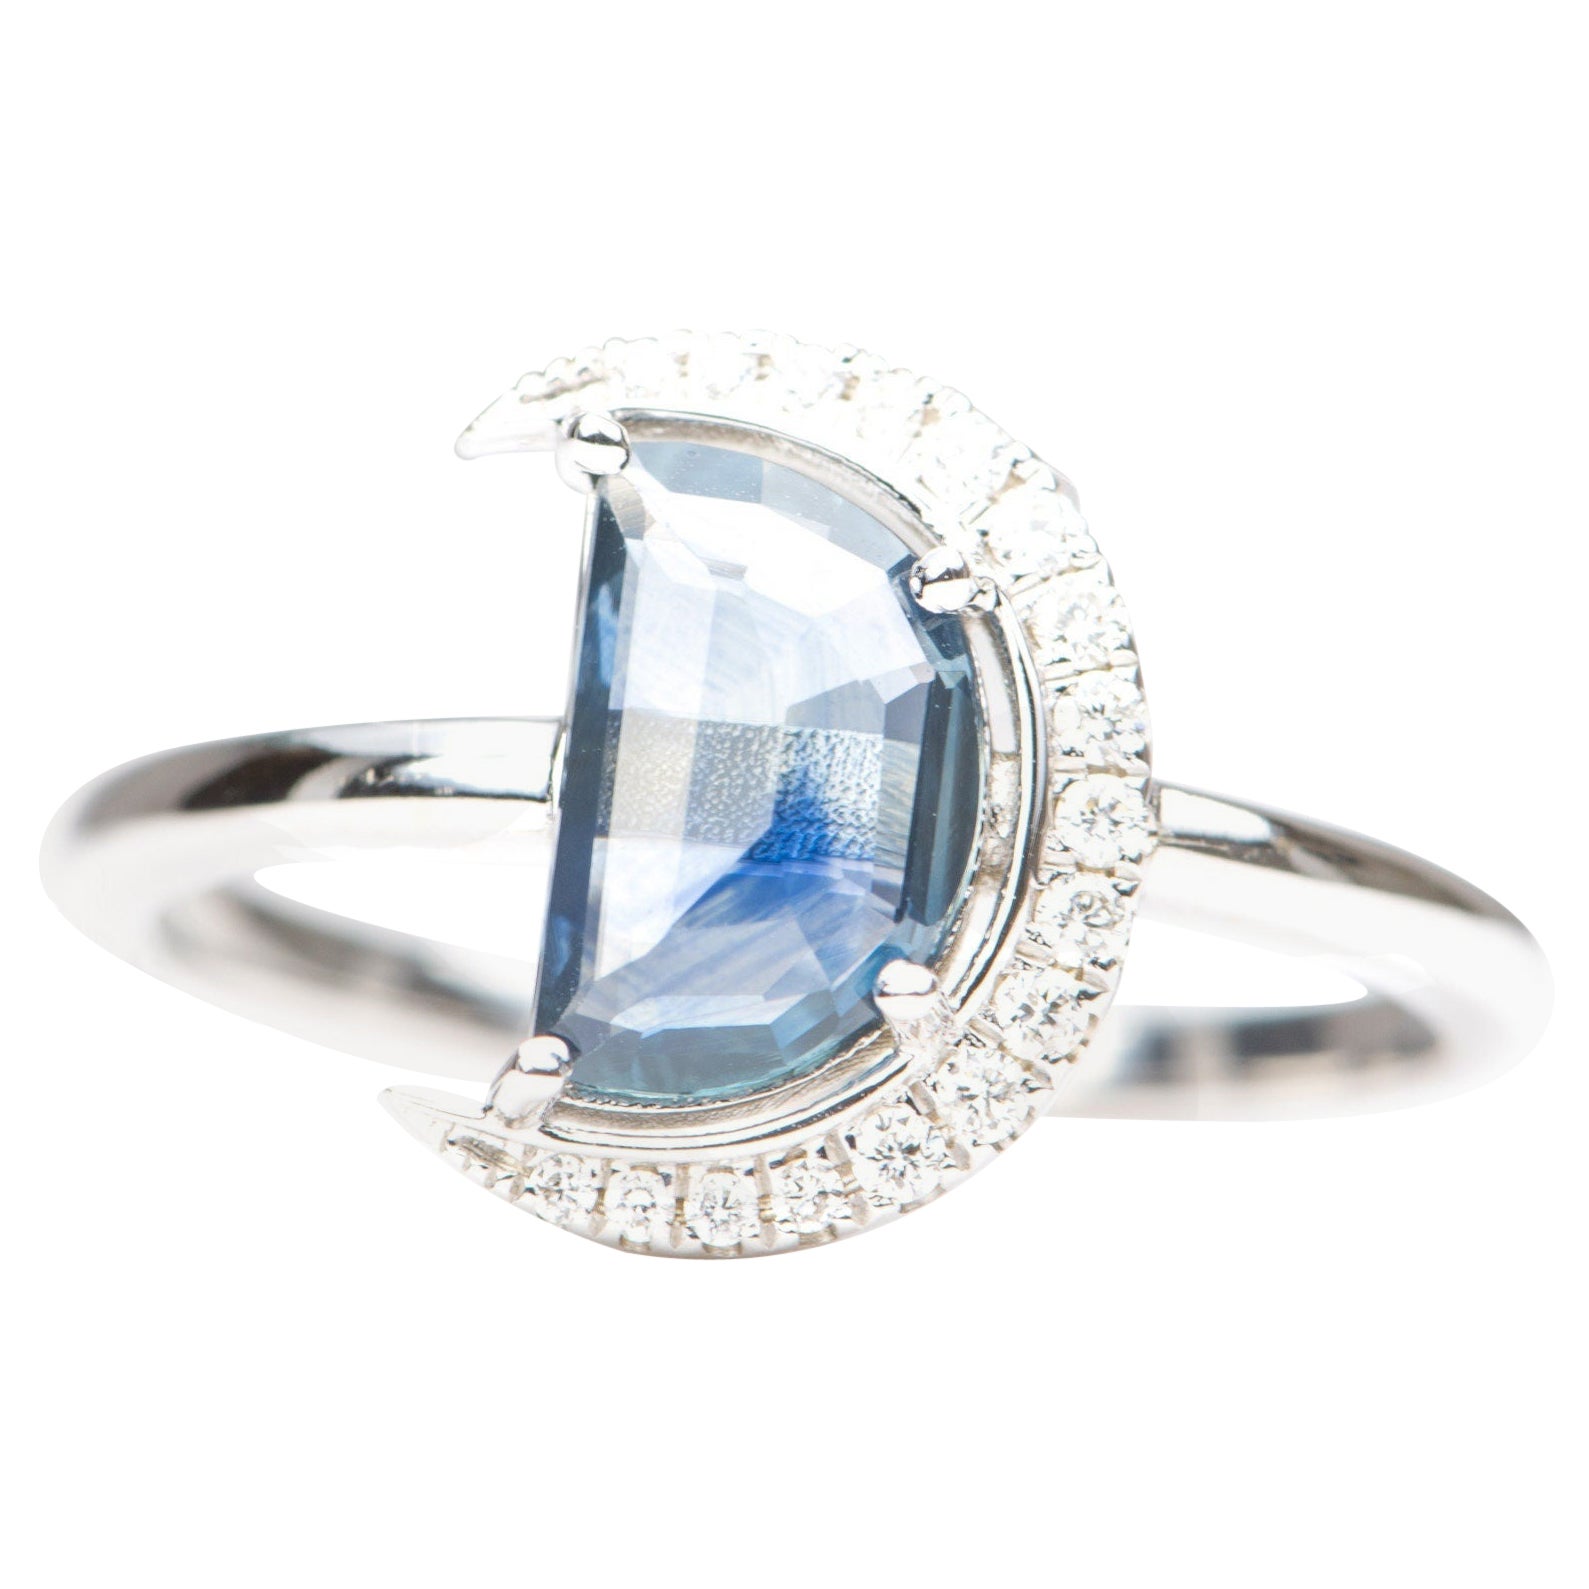 ♥ 14k white gold ring set with a beautiful Montana sapphire half moon in the center, nestled with a half halo of sparkly diamonds
♥ The overall setting measures 9.6mm in width, 12.3mm in length, and sits 3.5mm tall from the finger

♥ Material: 14K